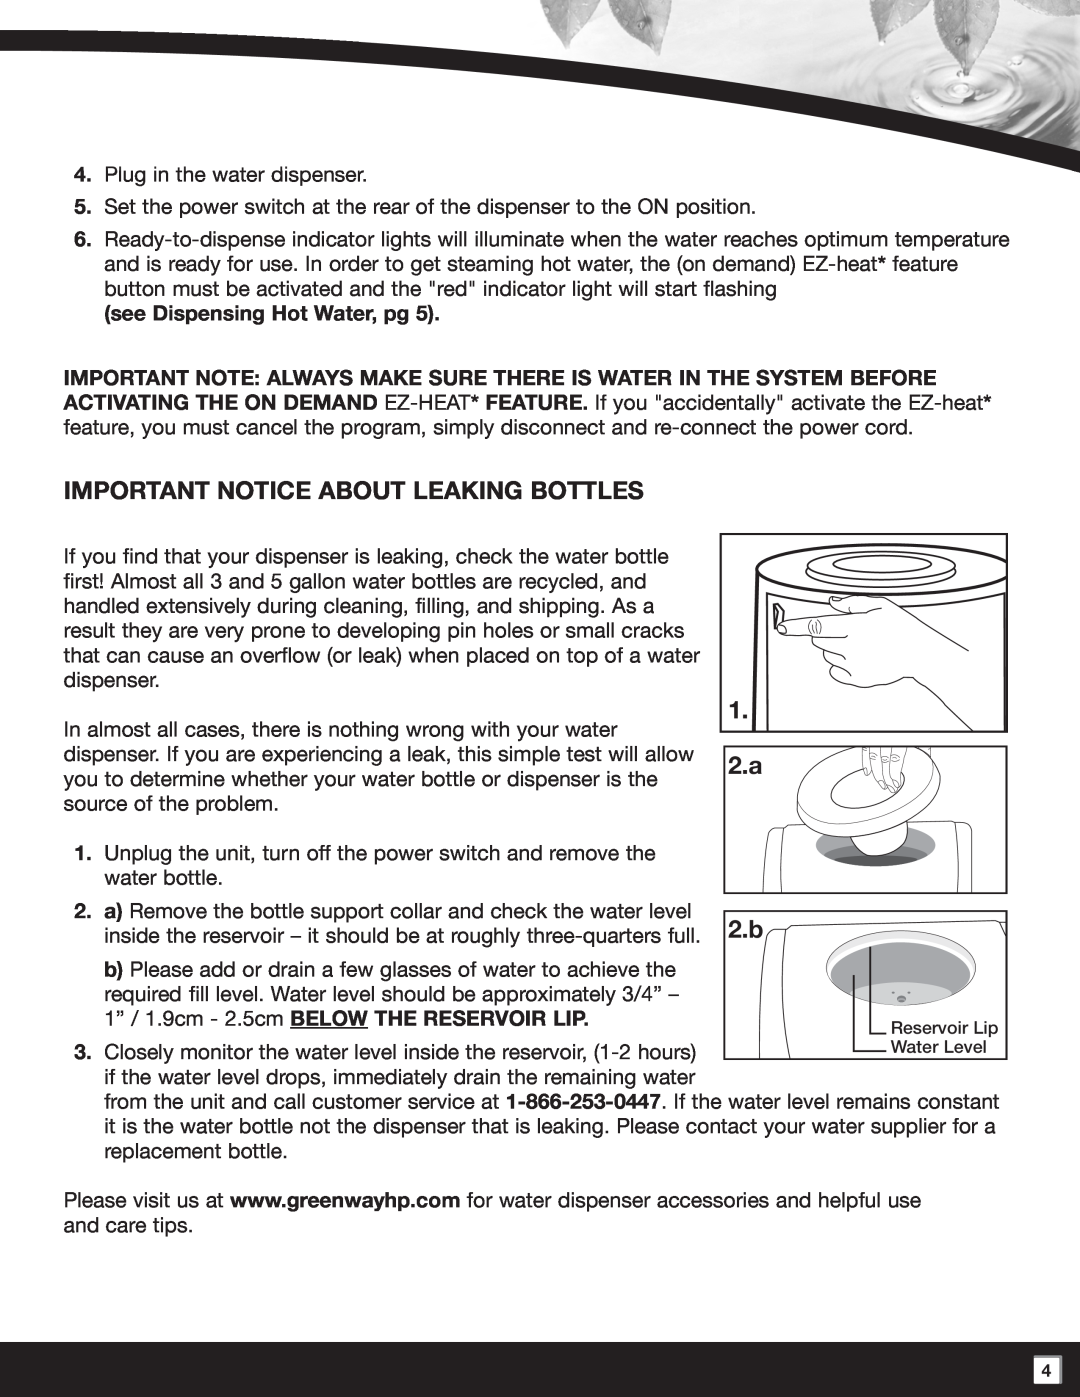 Greenway Home Products GWD2630W-1 manual IMPORTANT NOTICE ABout leaking bottles, see Dispensing Hot Water, pg 